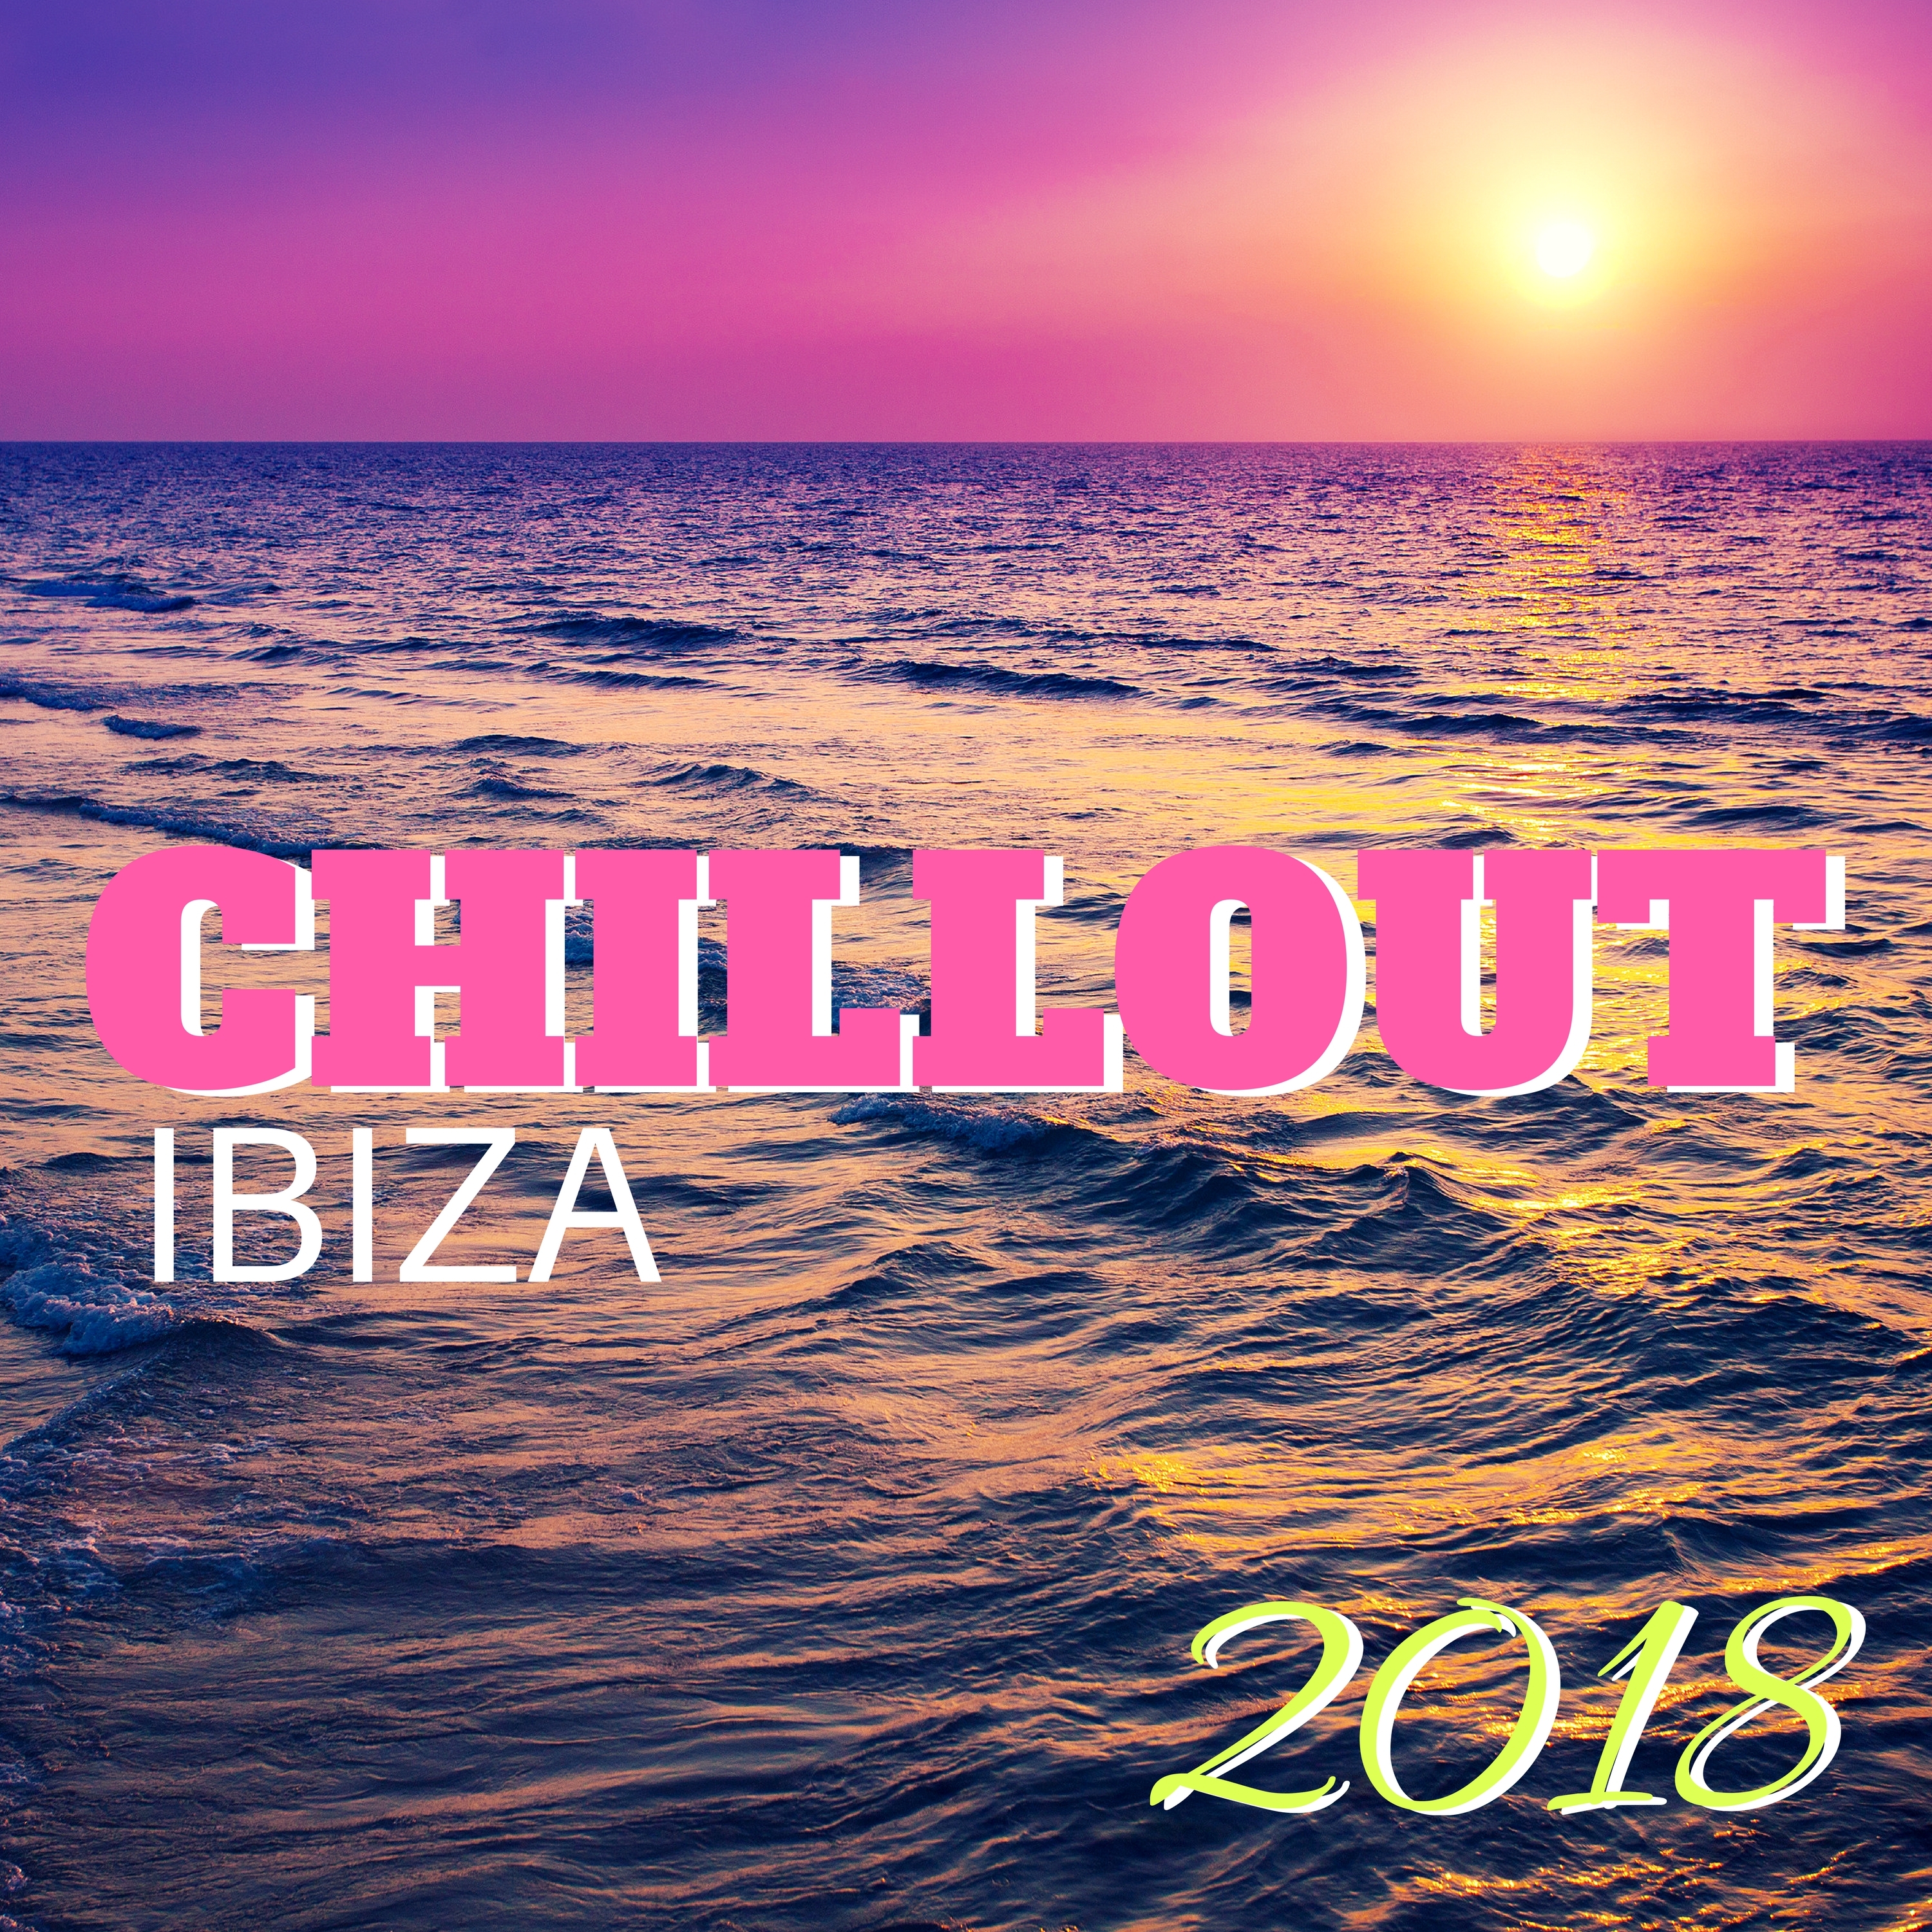 Chillout Ibiza 2018 - Chillout Mix for Lounge Music Cafe and Summer Party